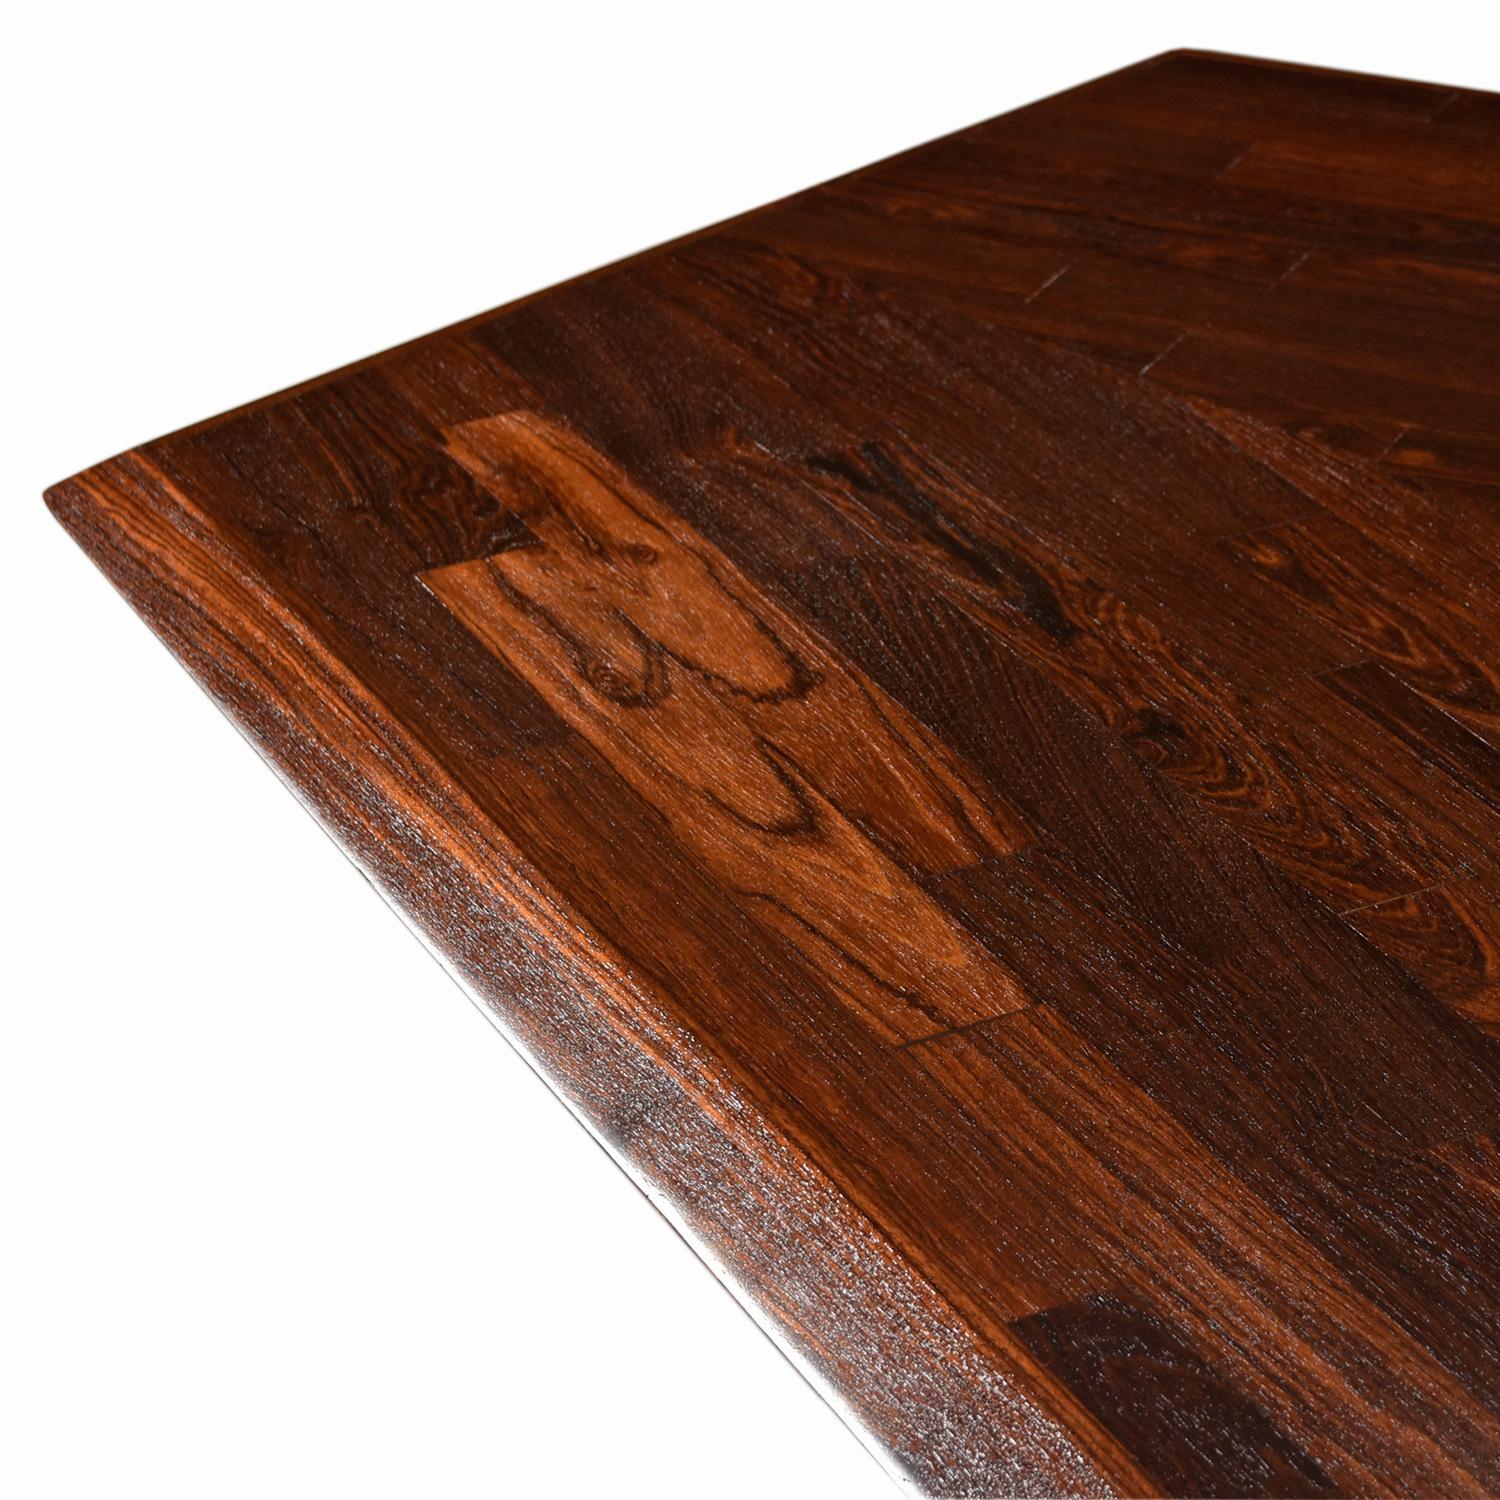 Cocobolo Rosewood Dining Table by Don S. Shoemaker for Señal S.A. of Mexico For Sale 3